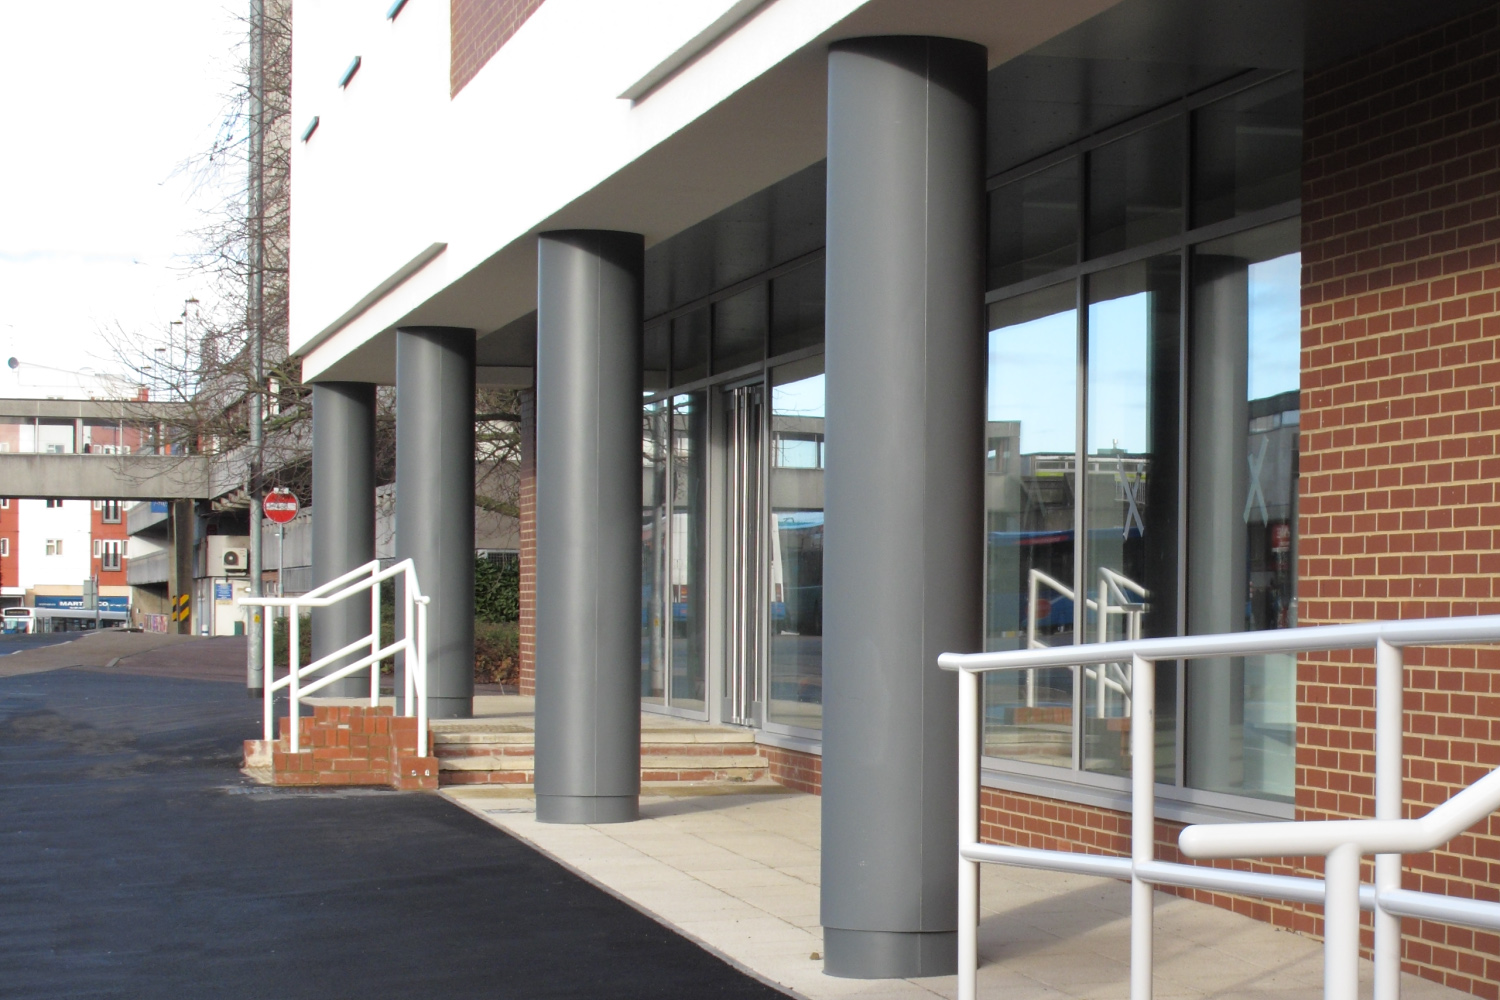 Polyma GRP column casings add style to Harlow’s Holiday Inn Express